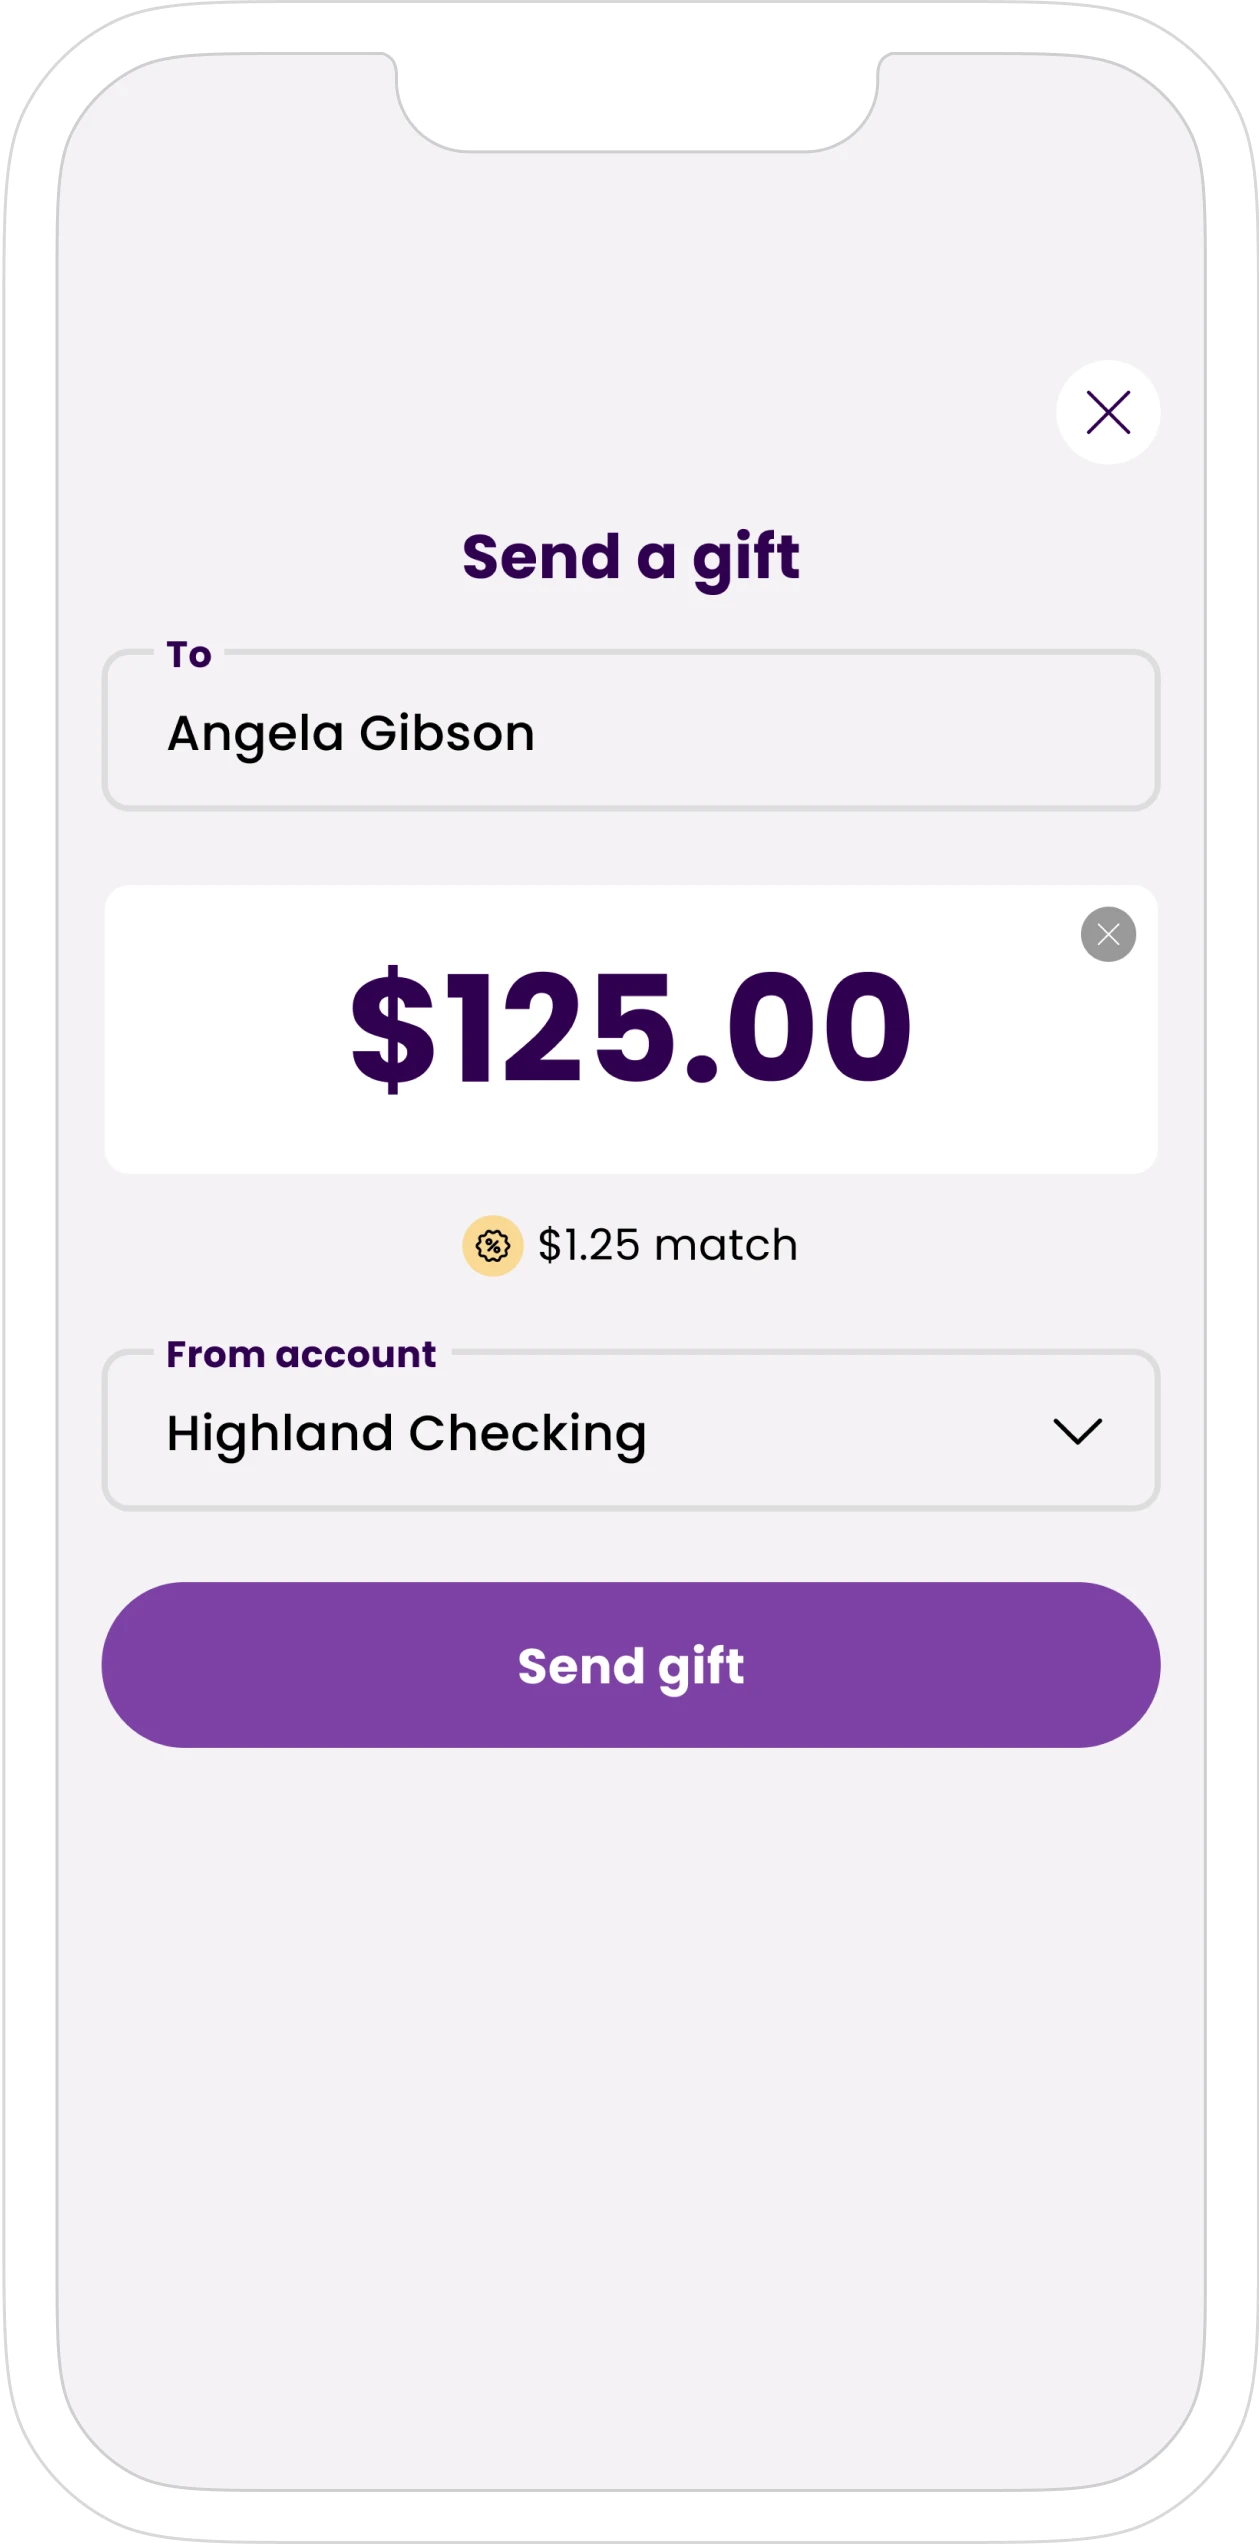 Mobile phone with Voura 'Send gift' screen, showing a recipent field, amount of $125 to send, $1.25 VouraMatch amount, and selected bank account to send from.